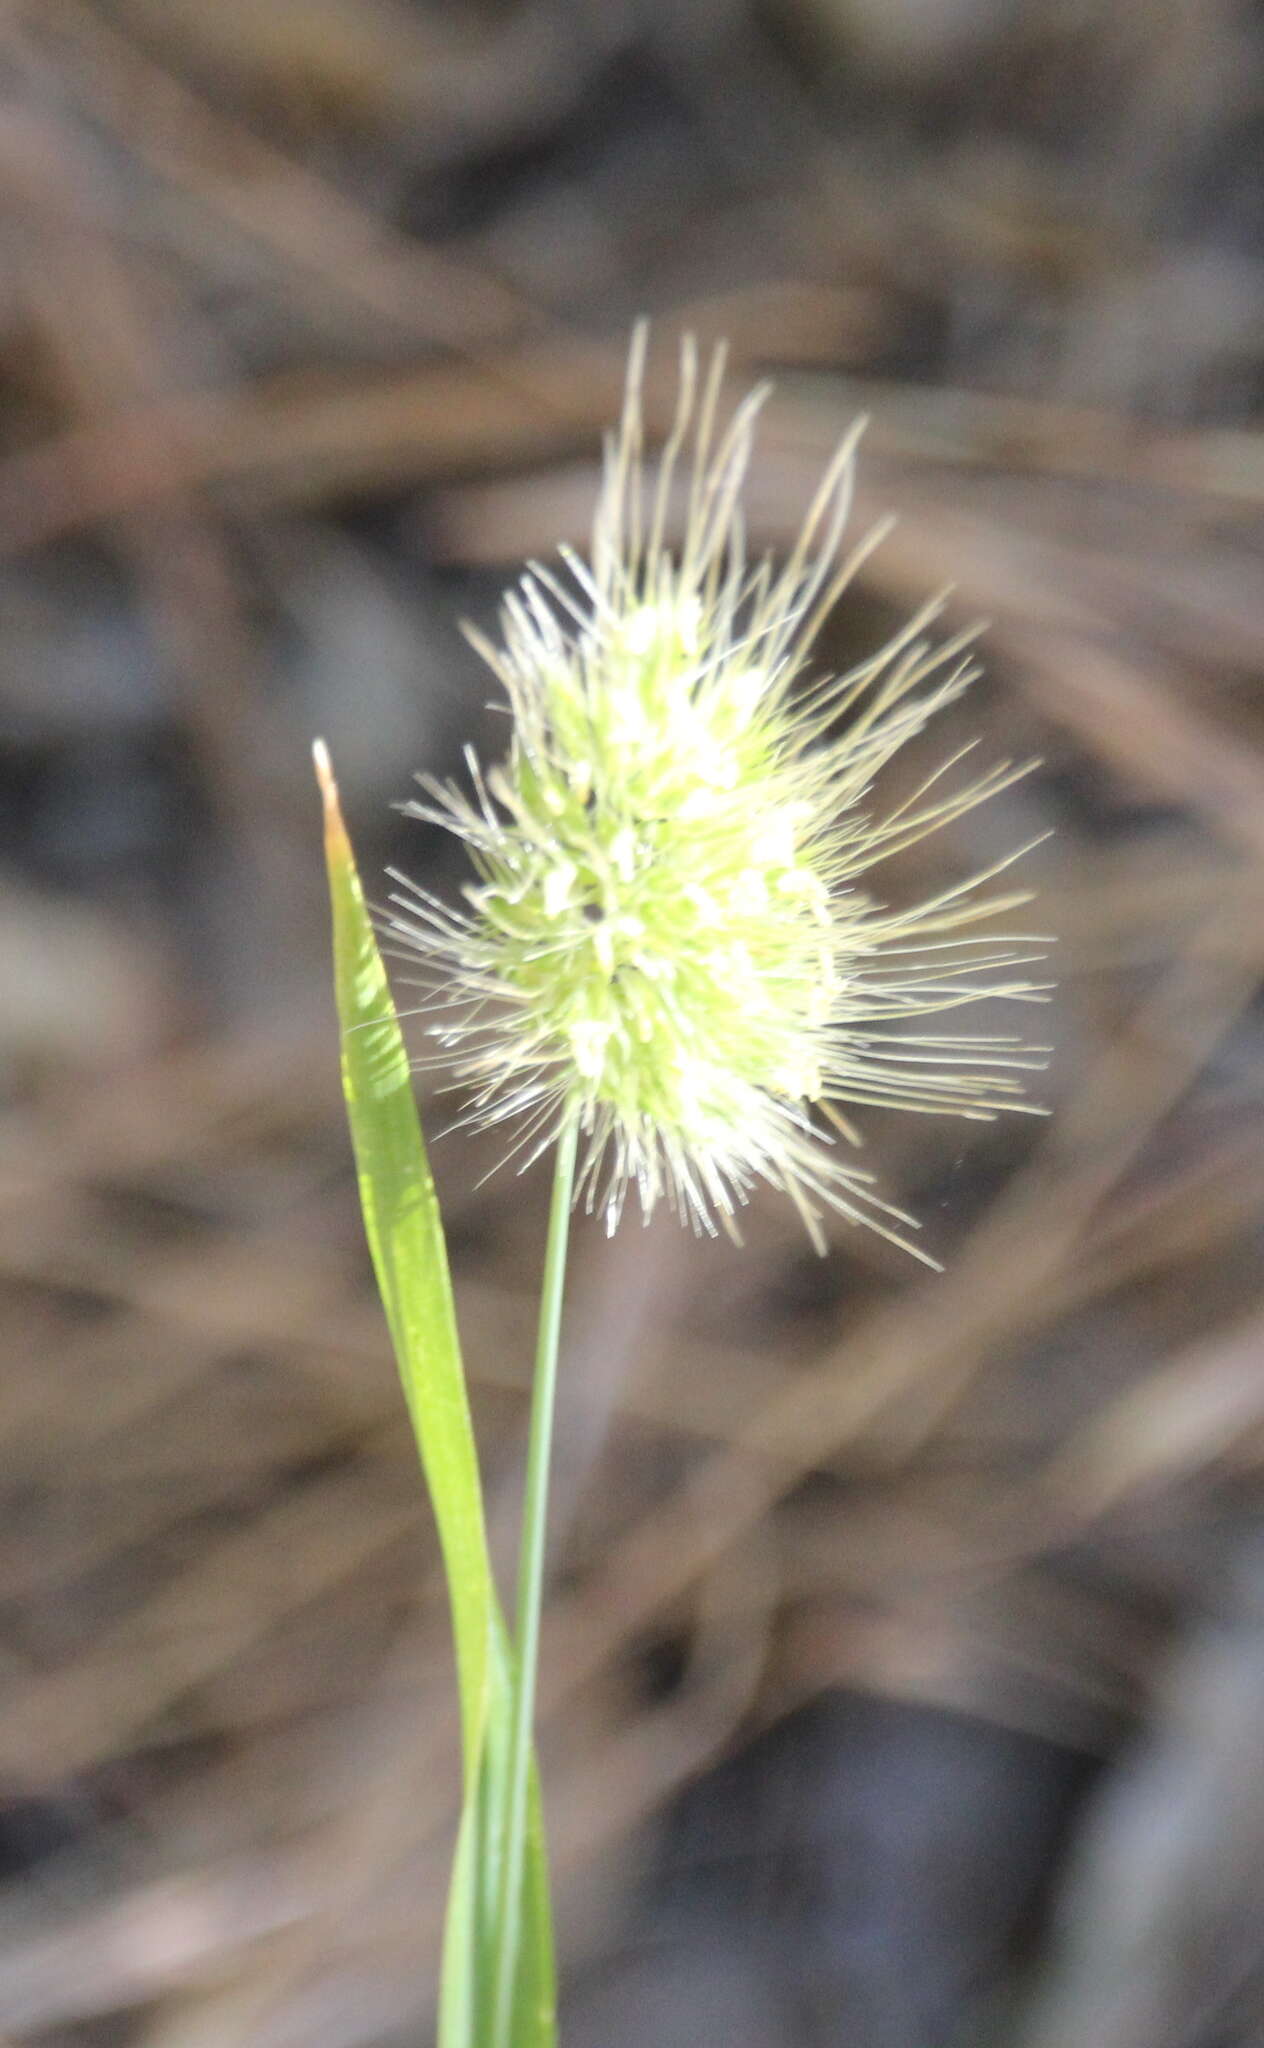 Image of Bristly dogstail grass